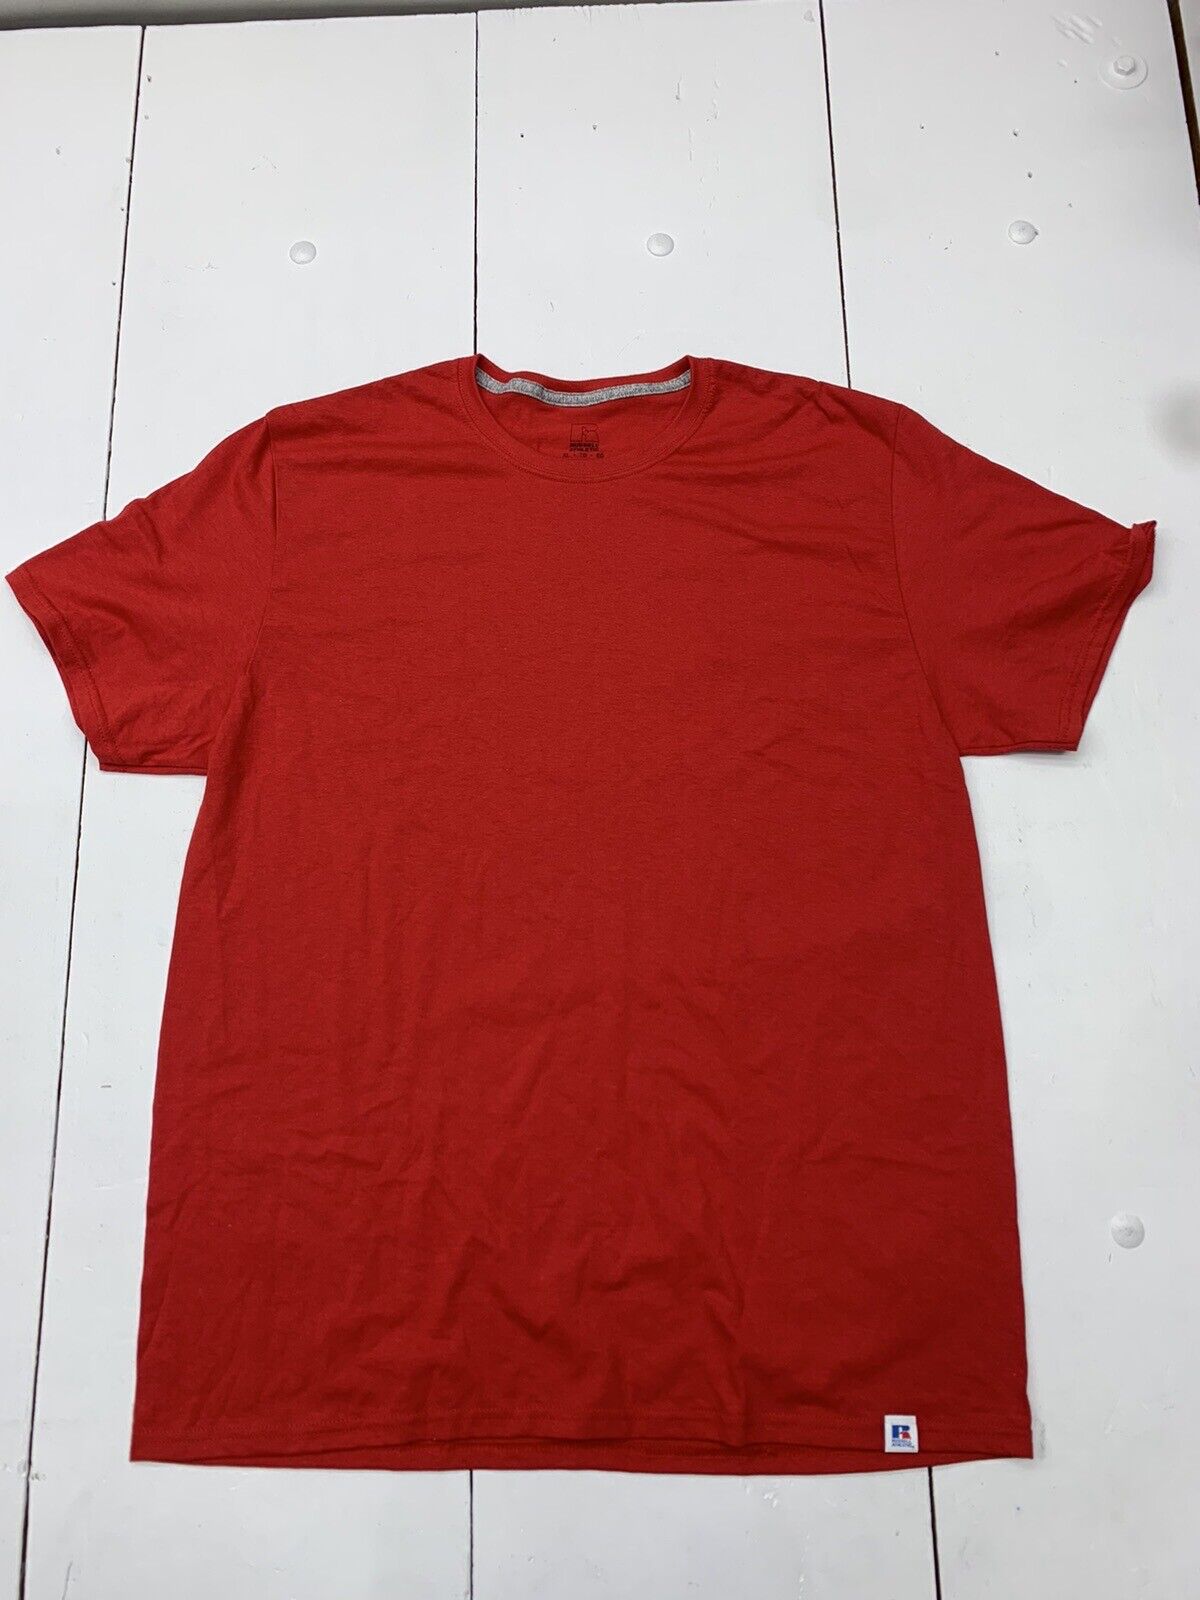 Russell Athletic Mens Red Short Sleeve Shirt Size XL